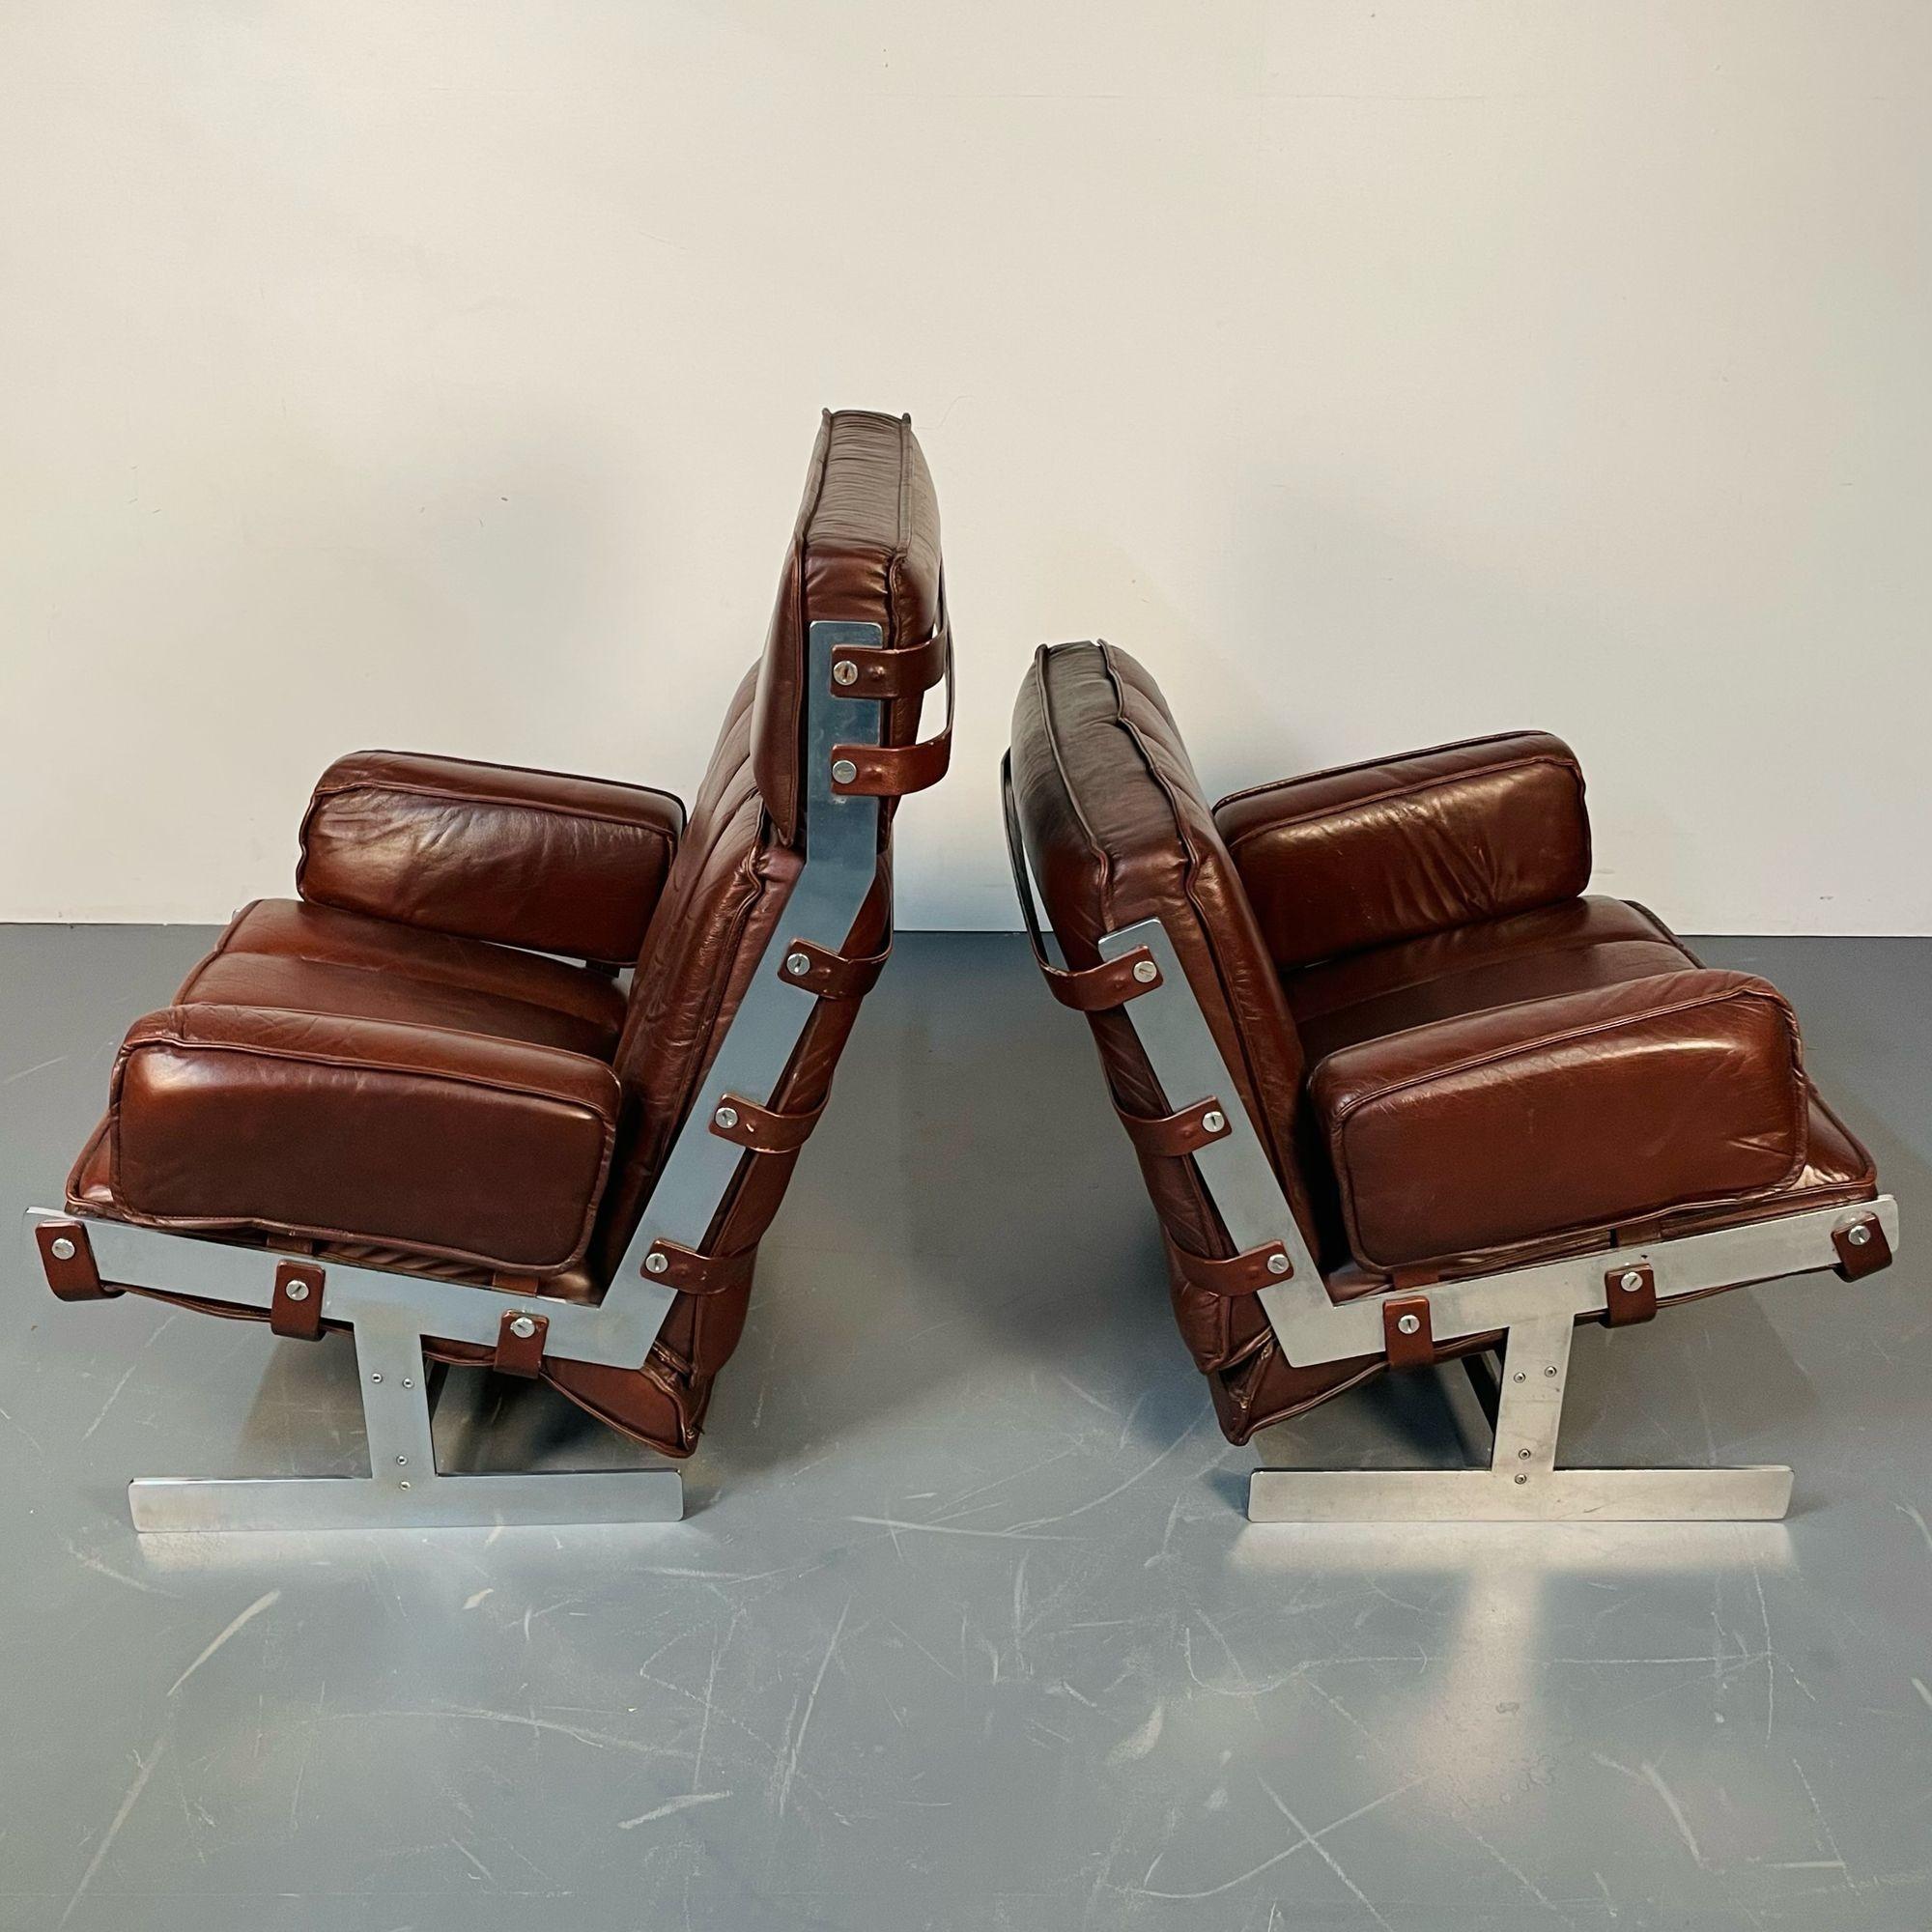 Arne Norell, Swedish Mid-Century Modern Lounge Chairs, Leather, Steel, 1960s For Sale 5